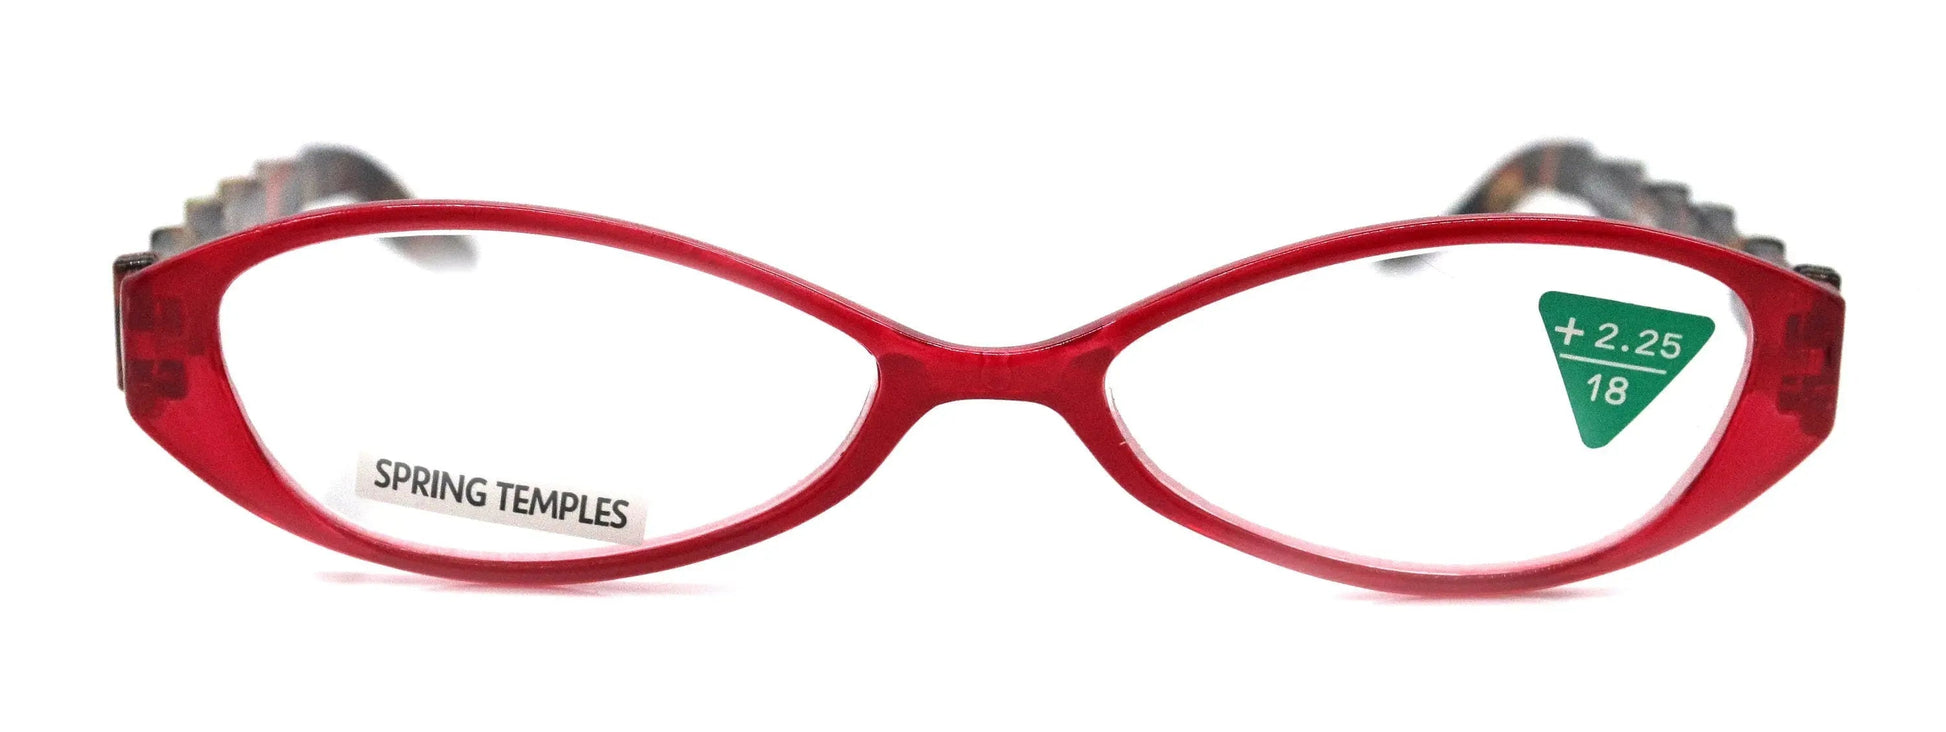 Lucky, (Premium) Reading Glasses, High End Readers +1.25 +1.50 +1.75 .. +3 Cat Eye. Bamboo Temple. (Red) Optical Frames NY Fifth Avenue.